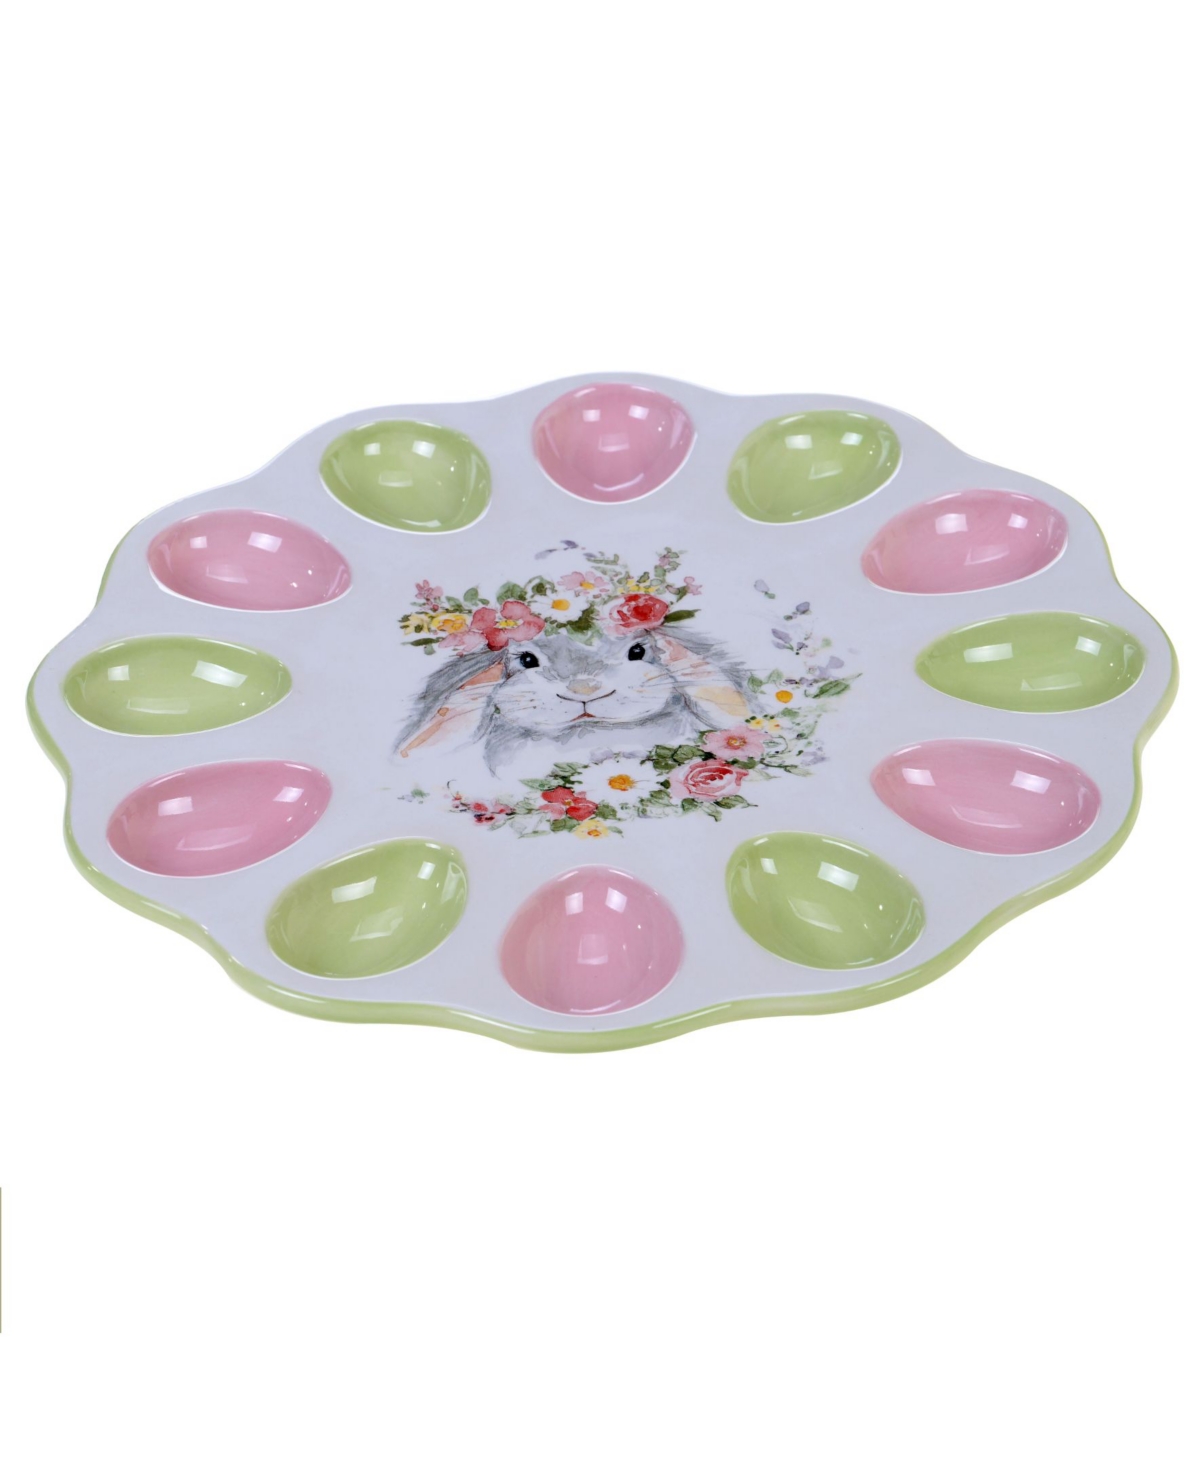 Certified International Sweet Bunny 3-d Egg Plate In White,gray,pink,green,yellow